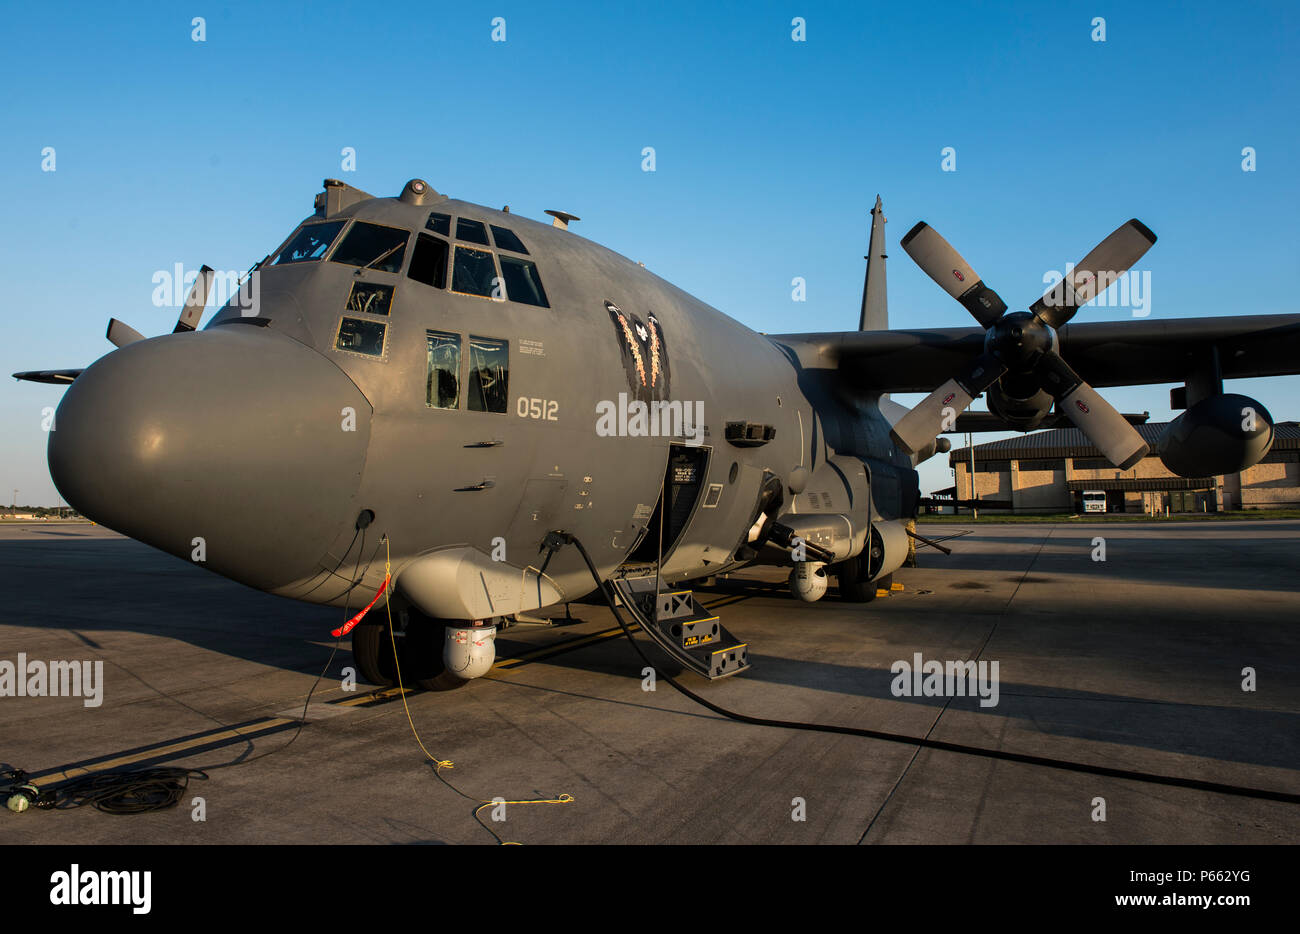 Kontrakt slutpunkt flygtninge A U.S. Air Force AC-130U Spooky gunship from the 4th Special Operations  Squadron sits on the ramp after participating in live fire close air  support operations during Exercise Emerald Warrior 16 at